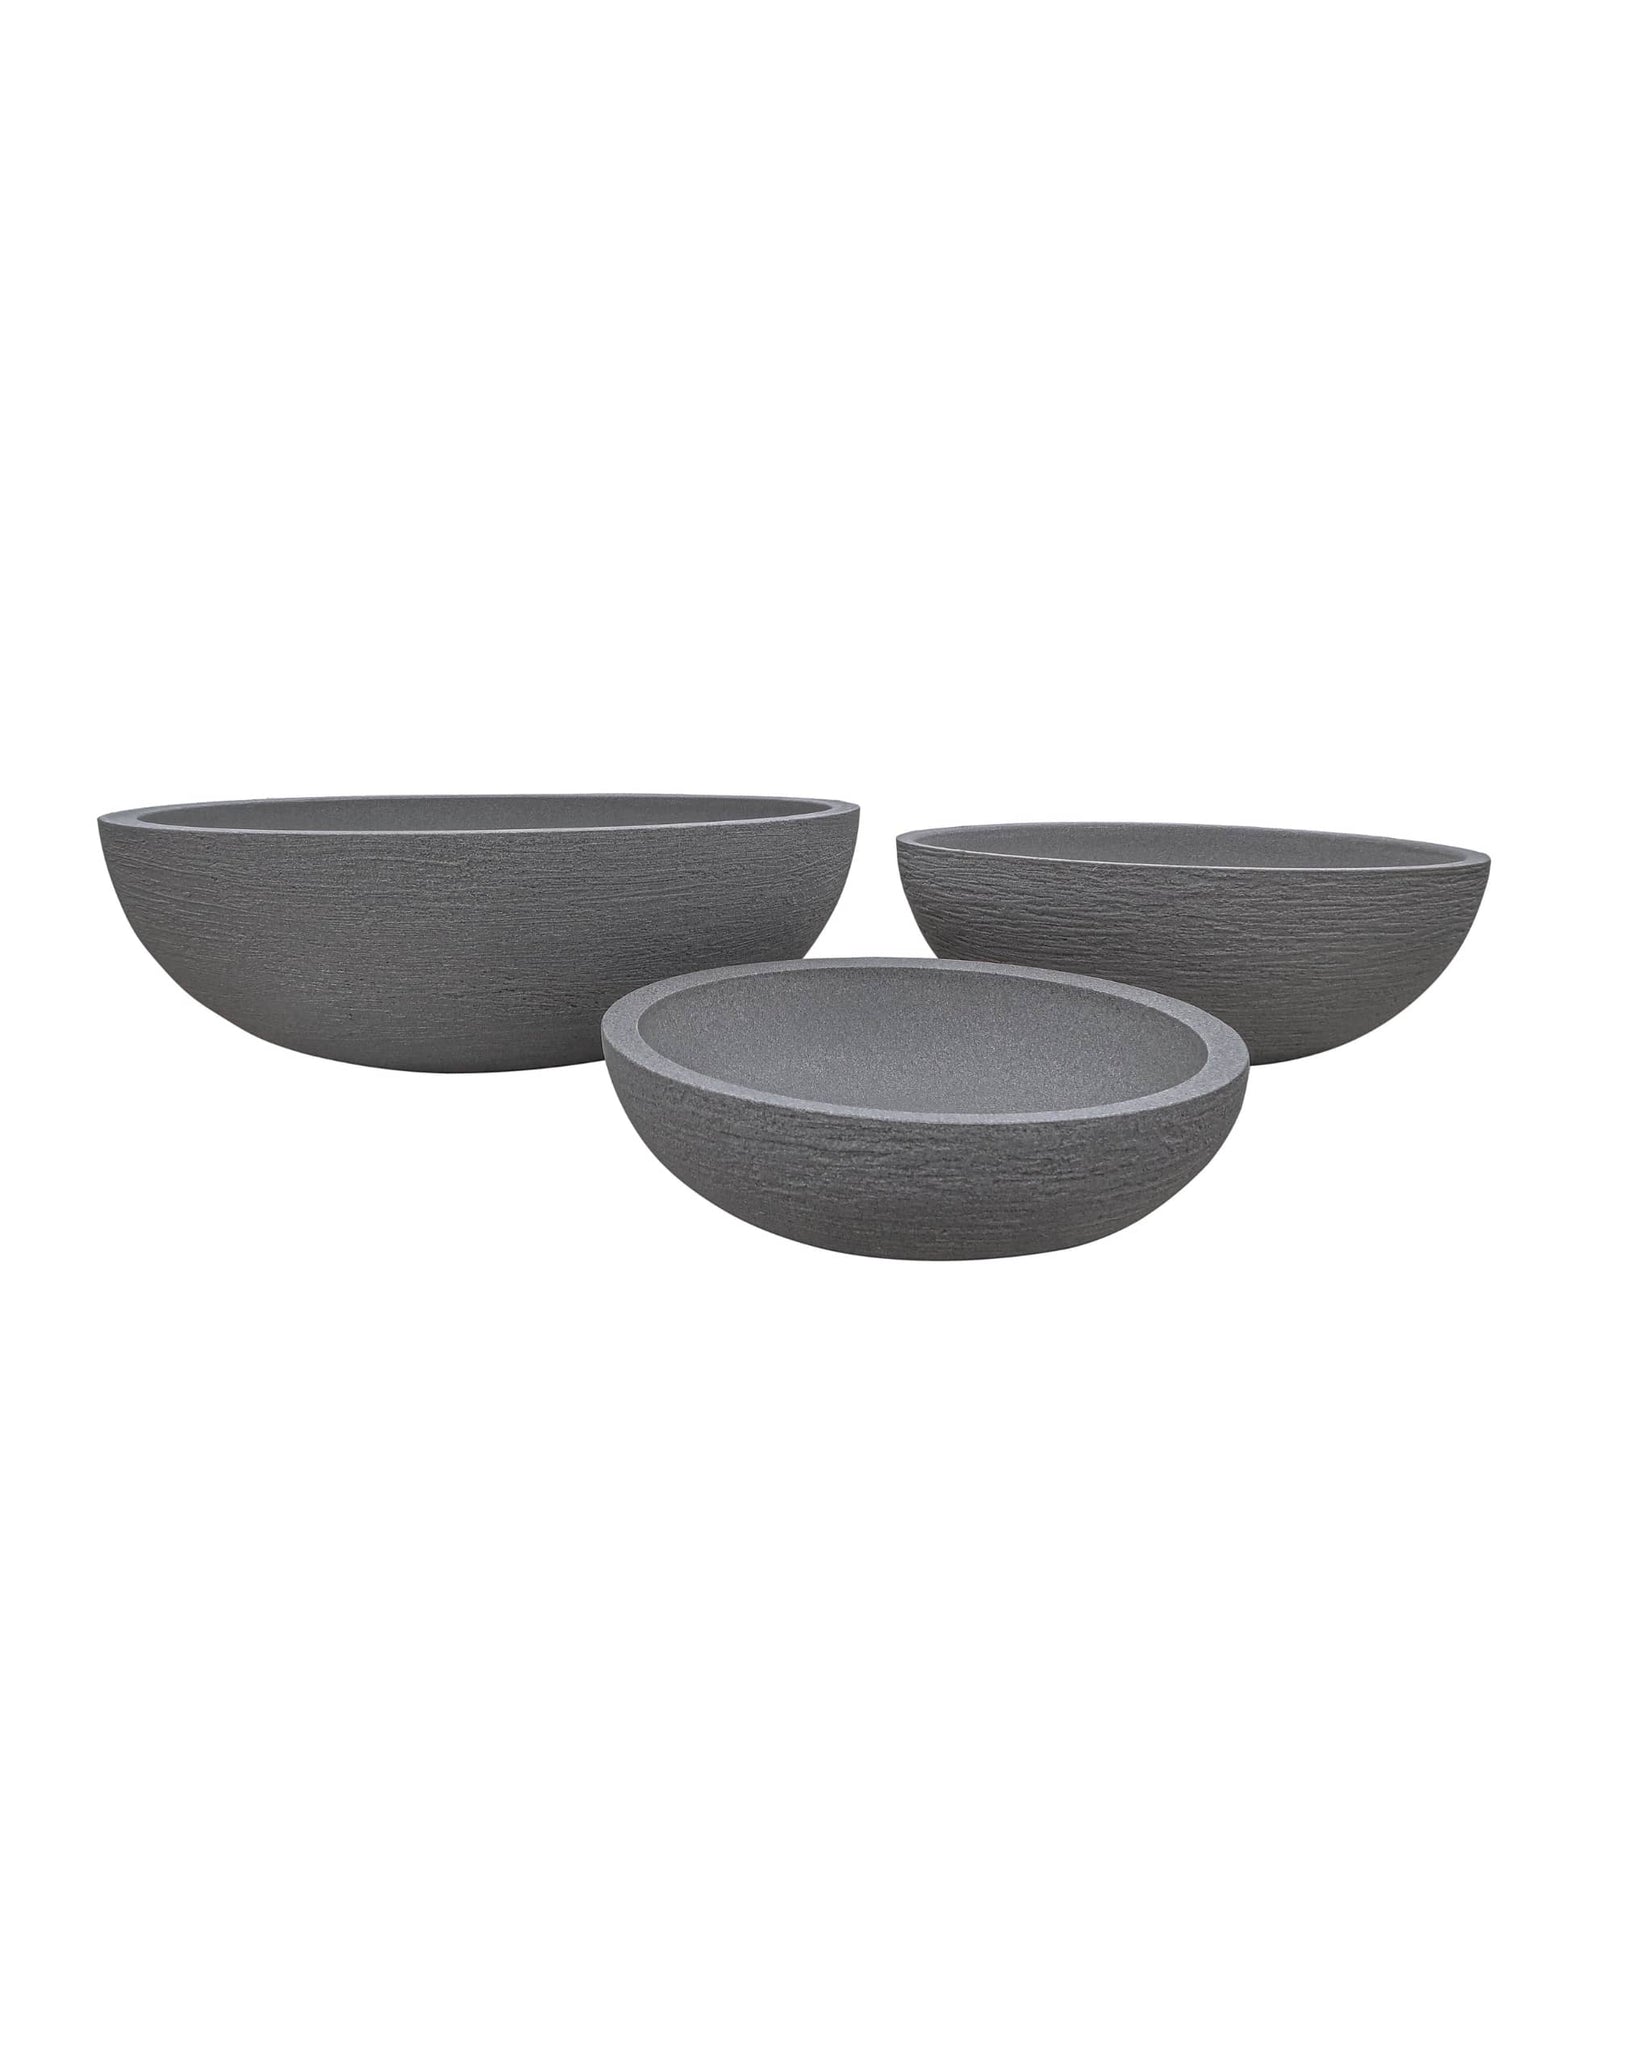 European bowls in three sizes, textured finish. Natural colour stone